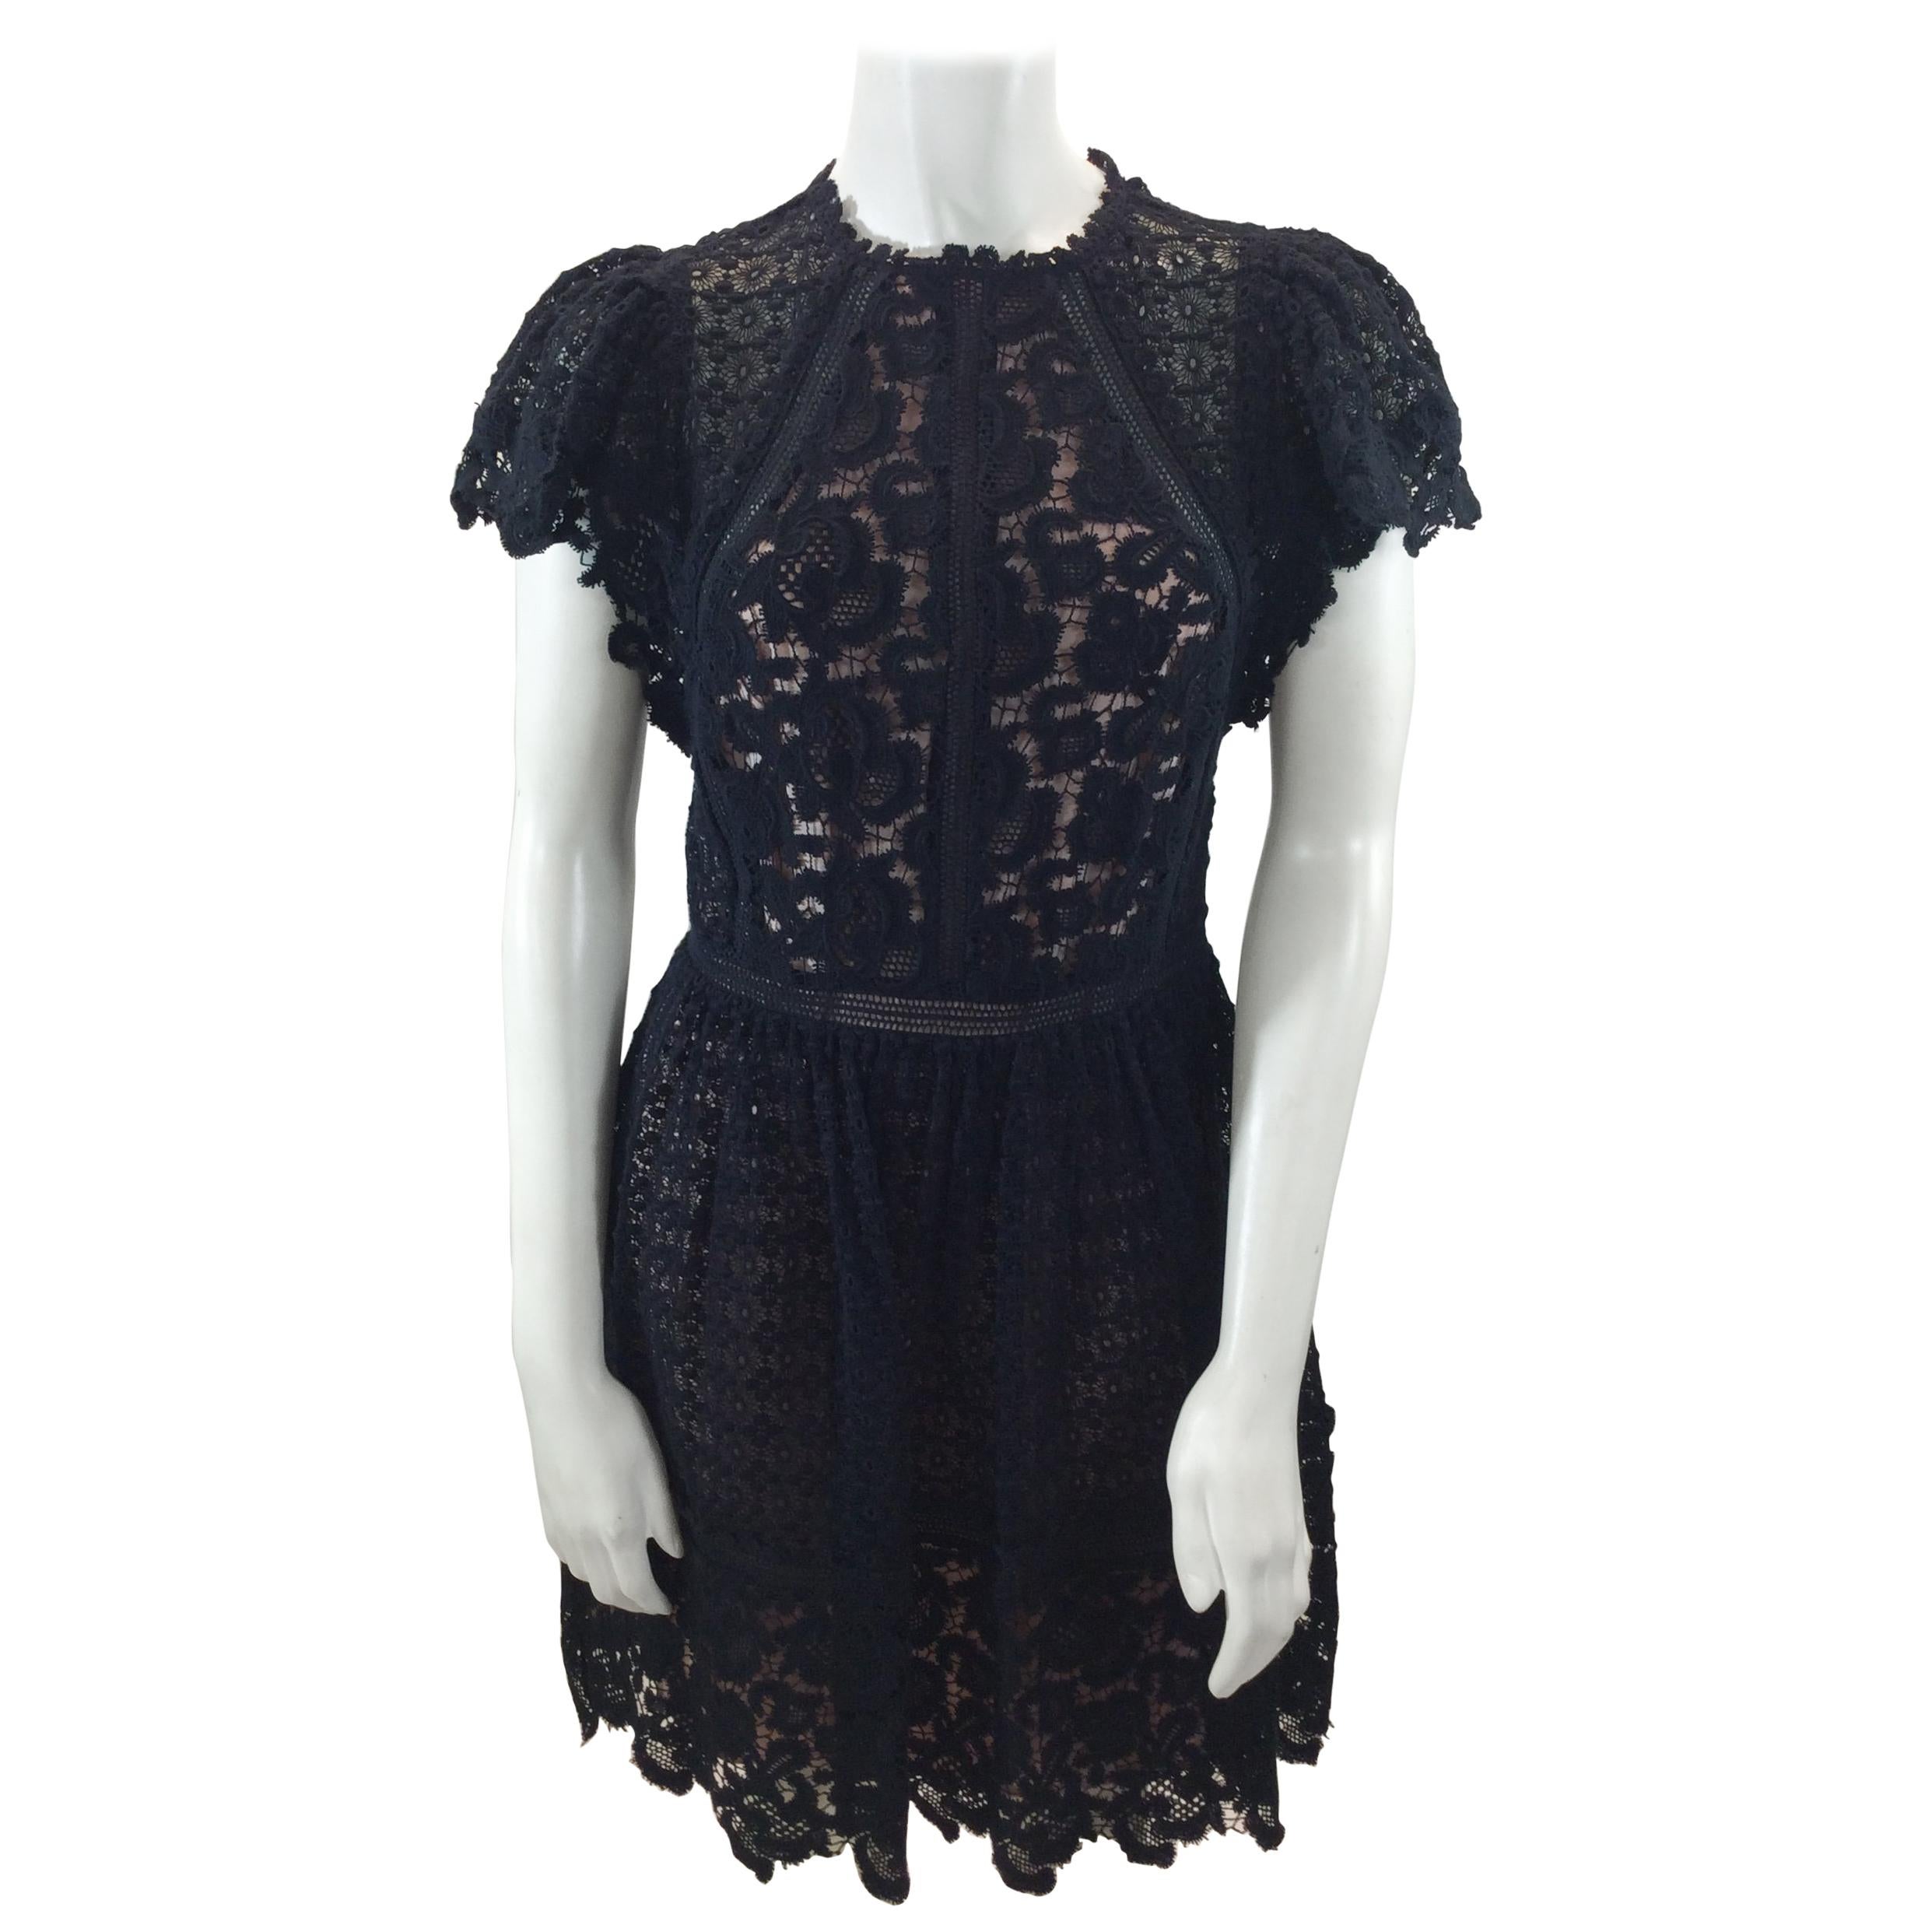 Rebecca Taylor Black Lace Dress NWT For Sale